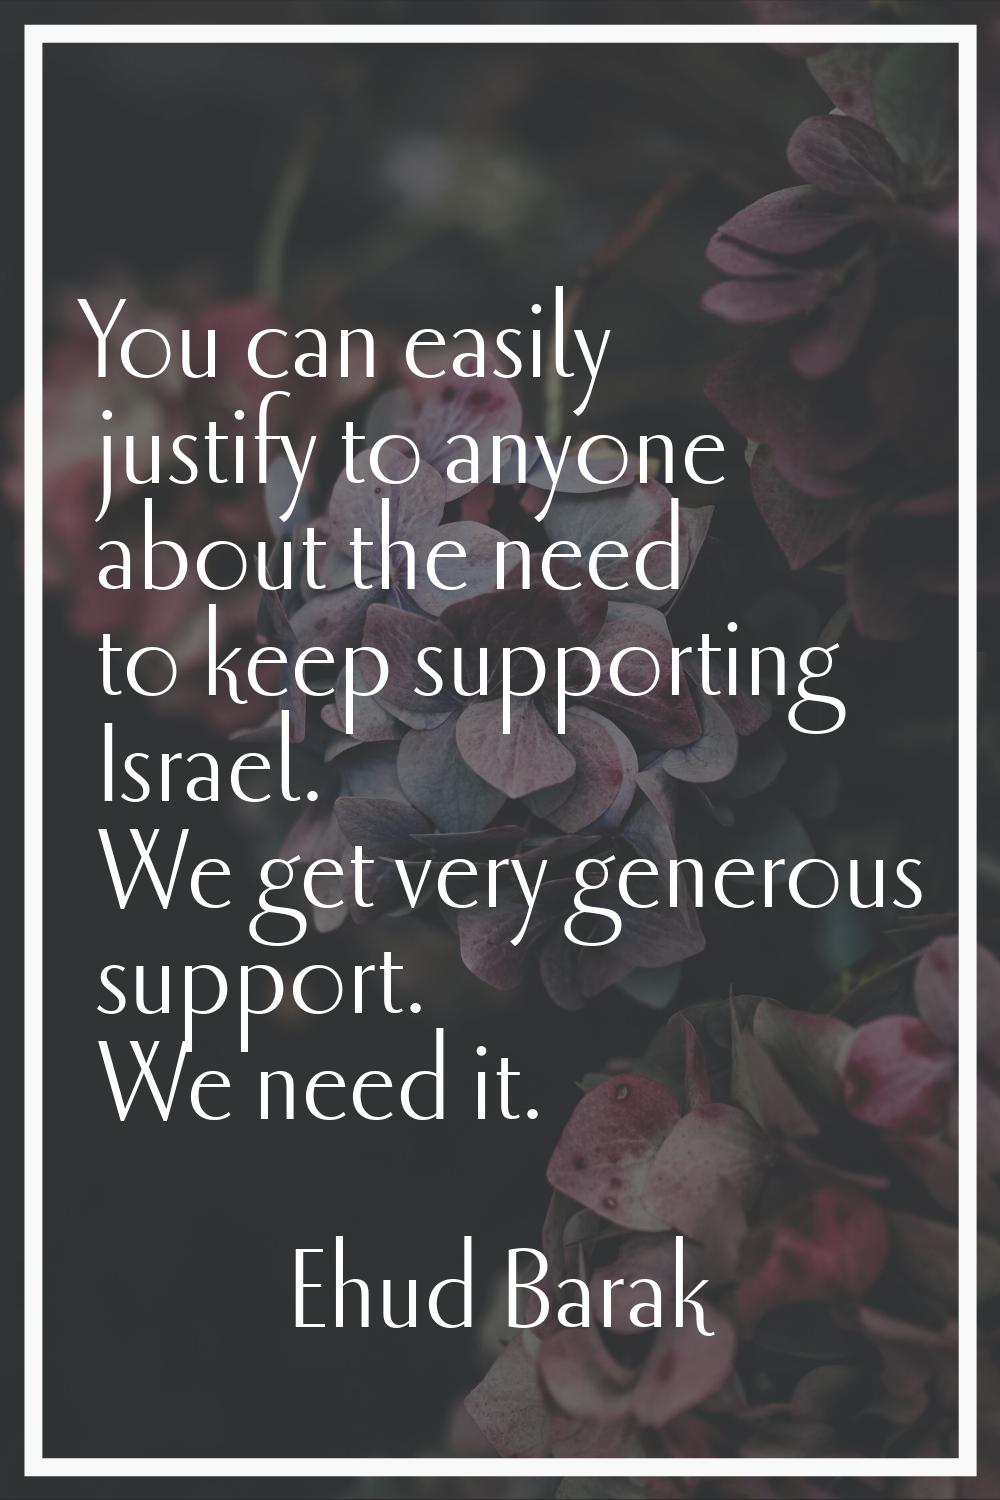 You can easily justify to anyone about the need to keep supporting Israel. We get very generous sup